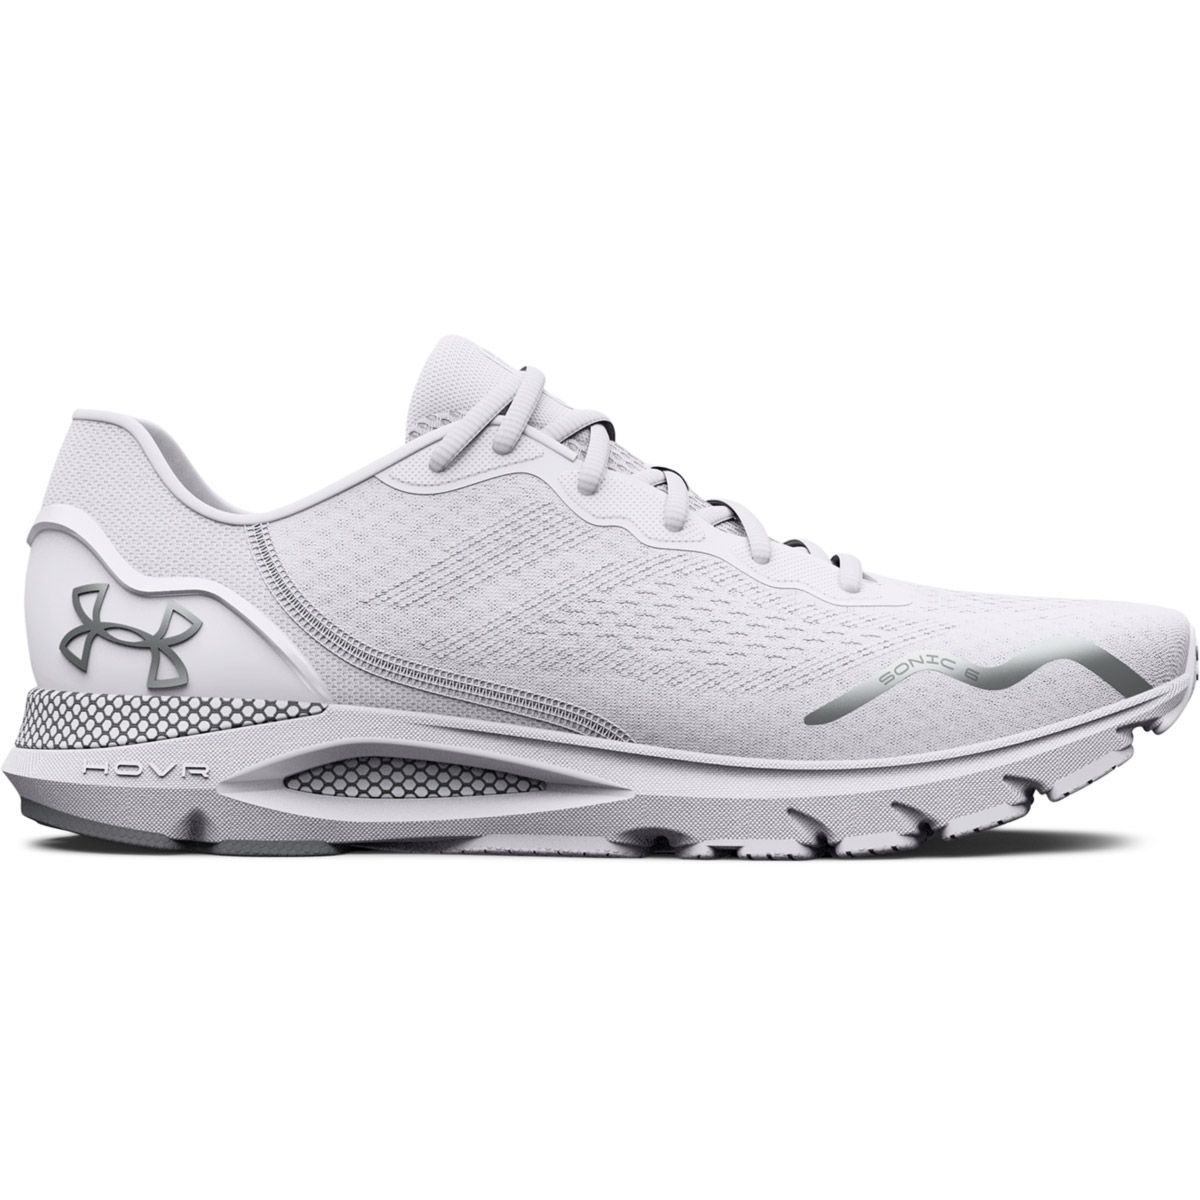 Under Armour Hovr Sonic 6 Men's Running Shoes 3026121-100